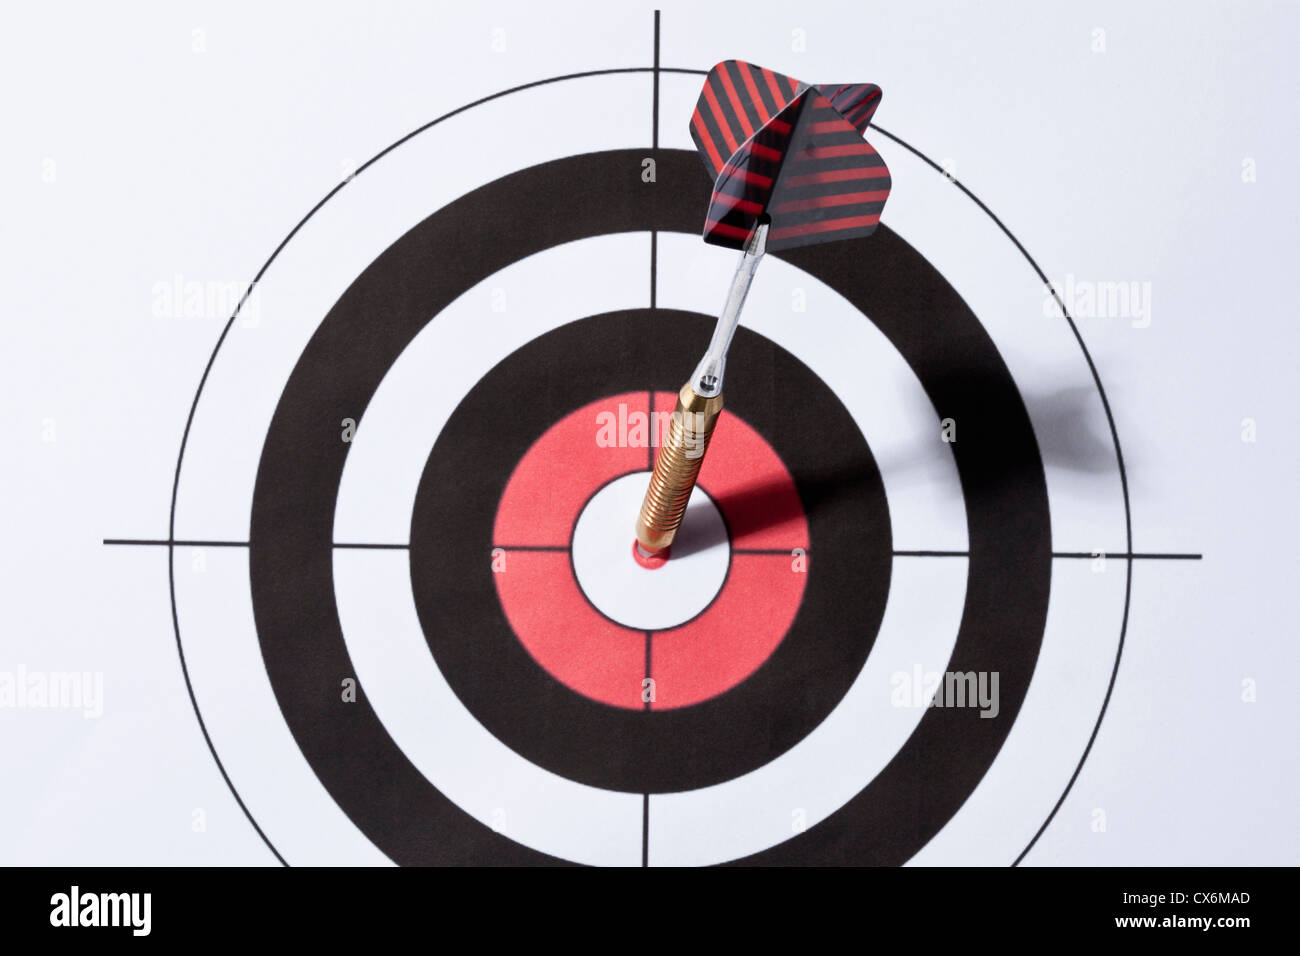 A dart in the bull's eye of a target Stock Photo